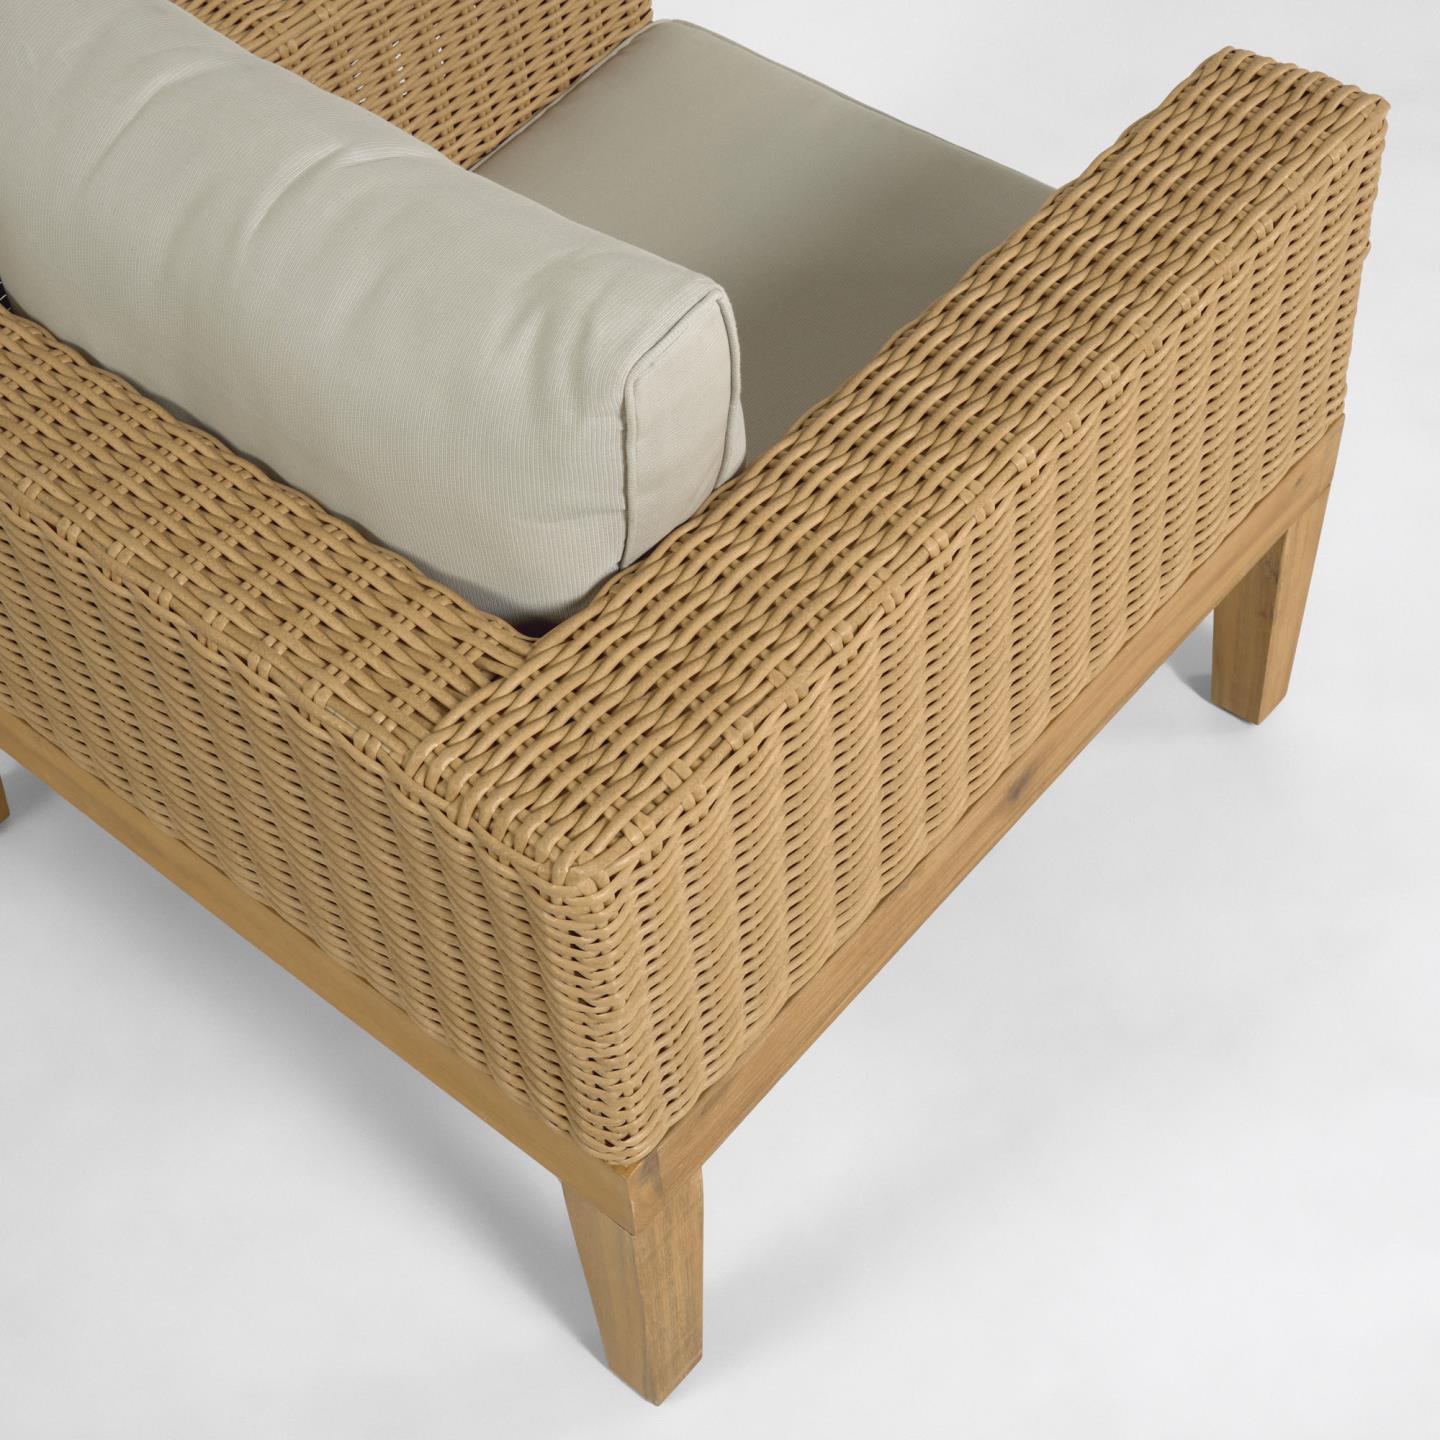 Giana armchair in solid acacia wood and rattan FSC 100%